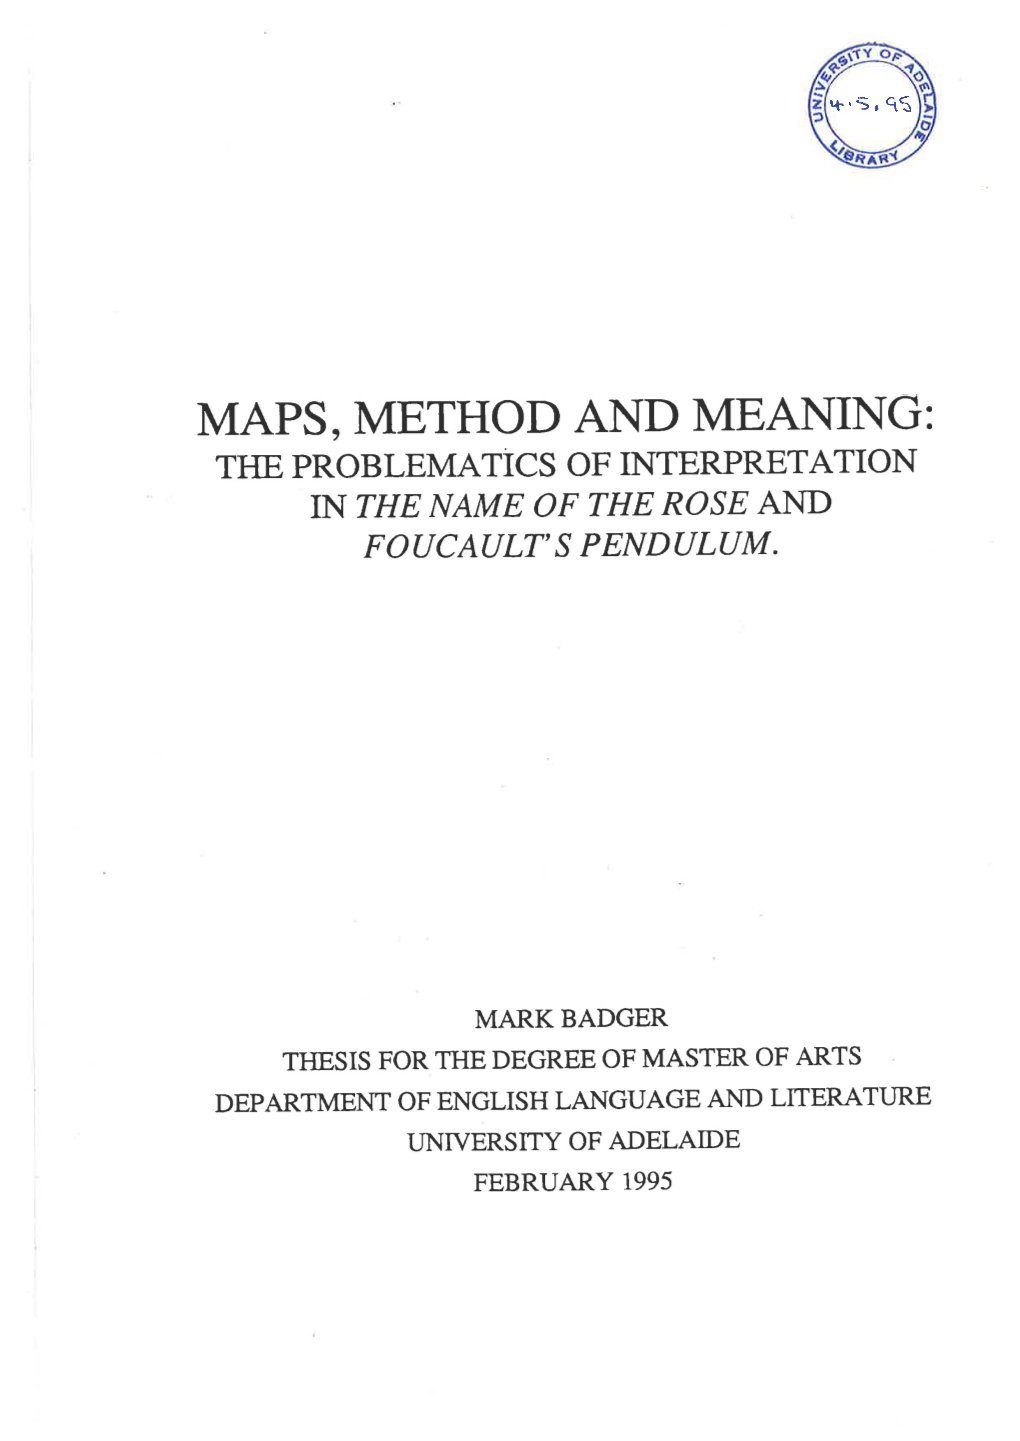 Maps, Method and Meaning: Ttie Problematics of Interpretation in Tfie Name of the Rose and Foucault's Pendulum